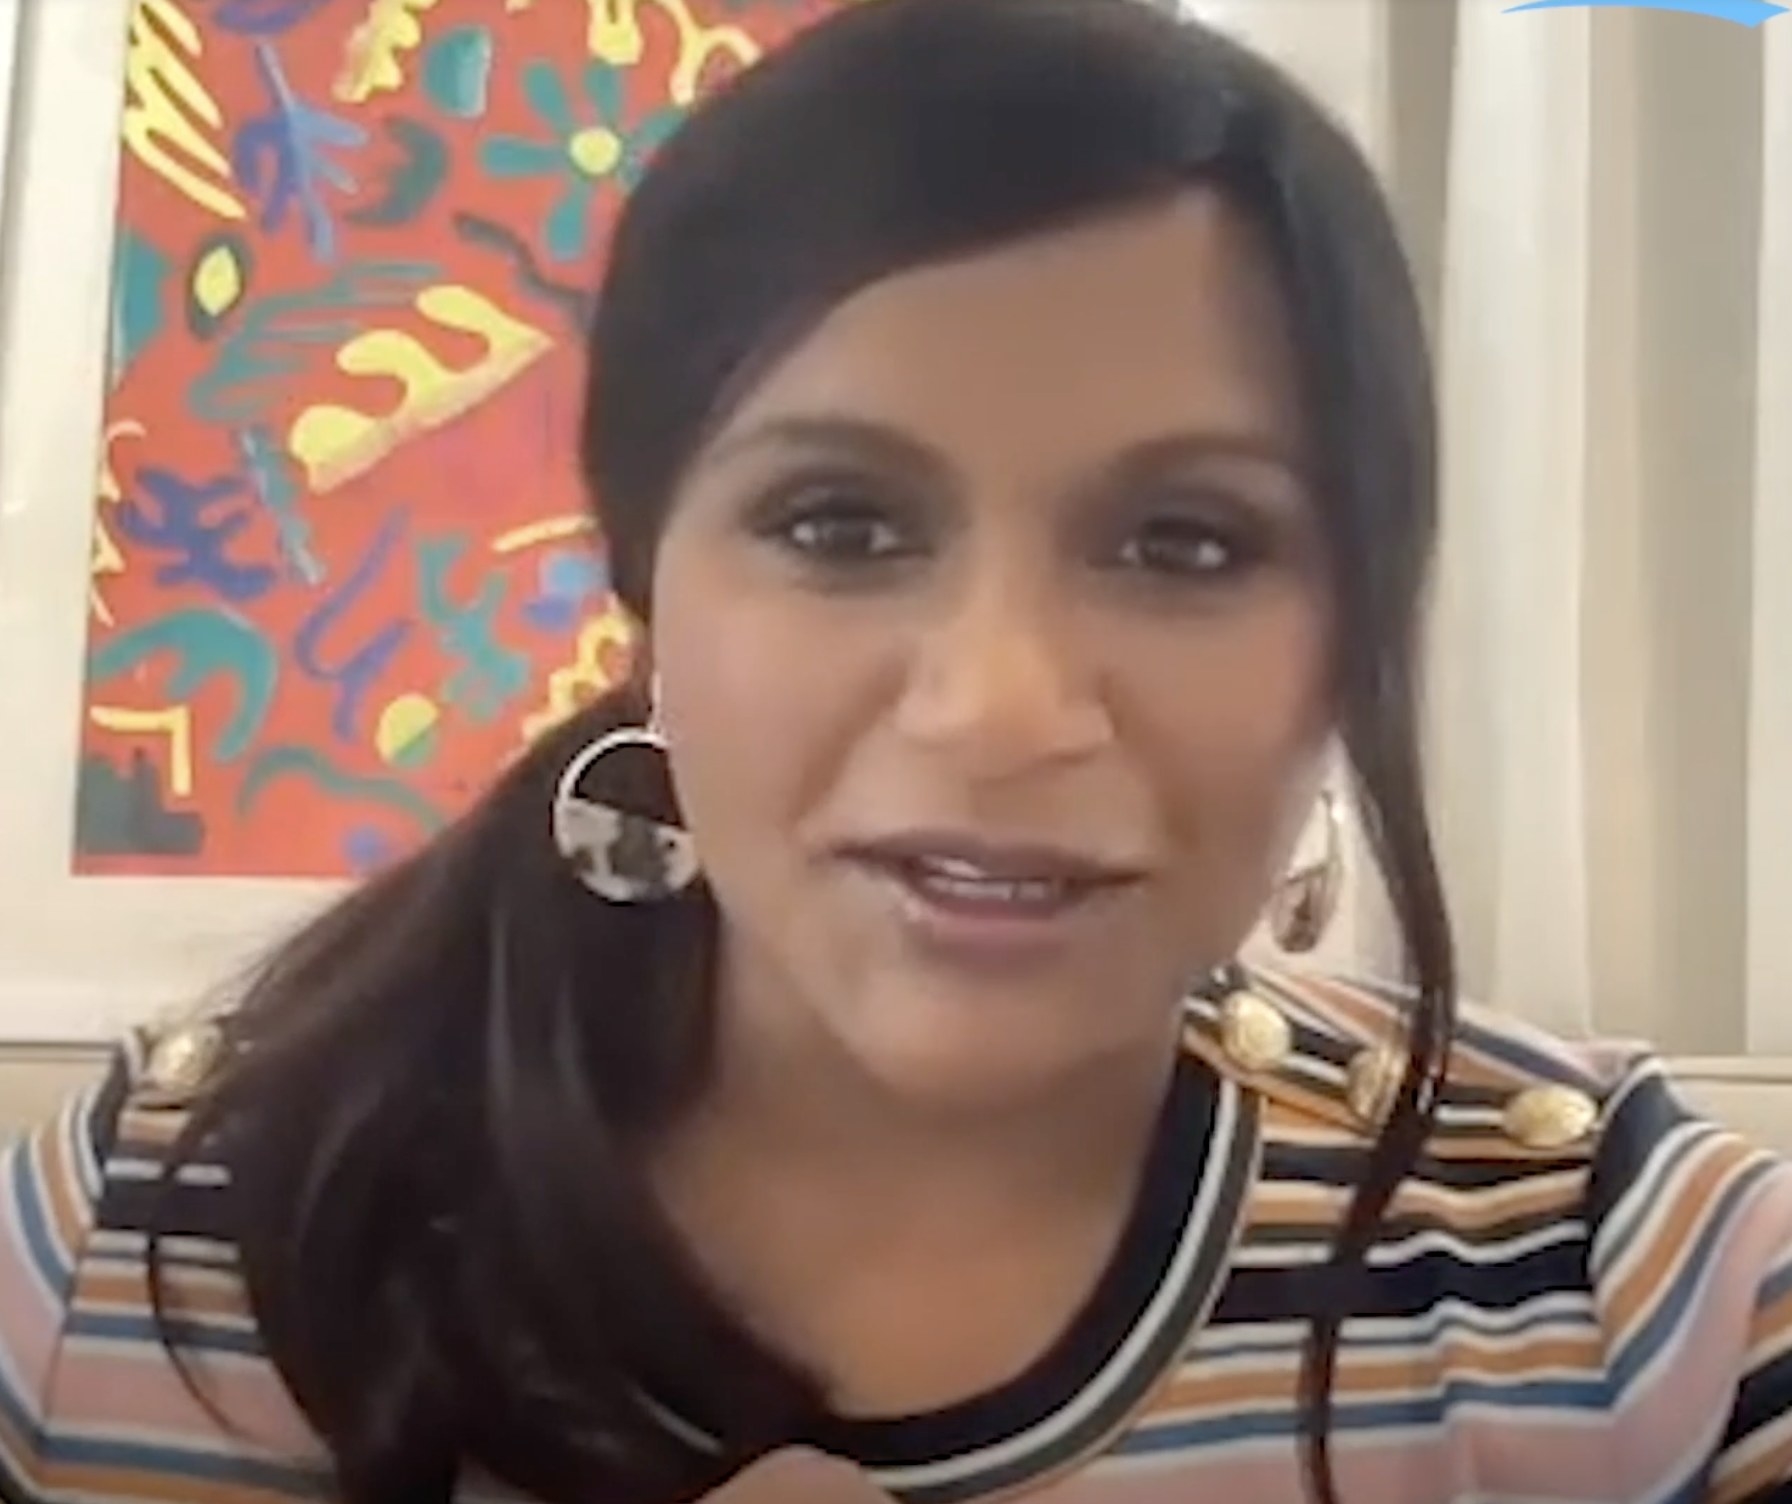 Mindy chats during her interview while wearing a striped shirt